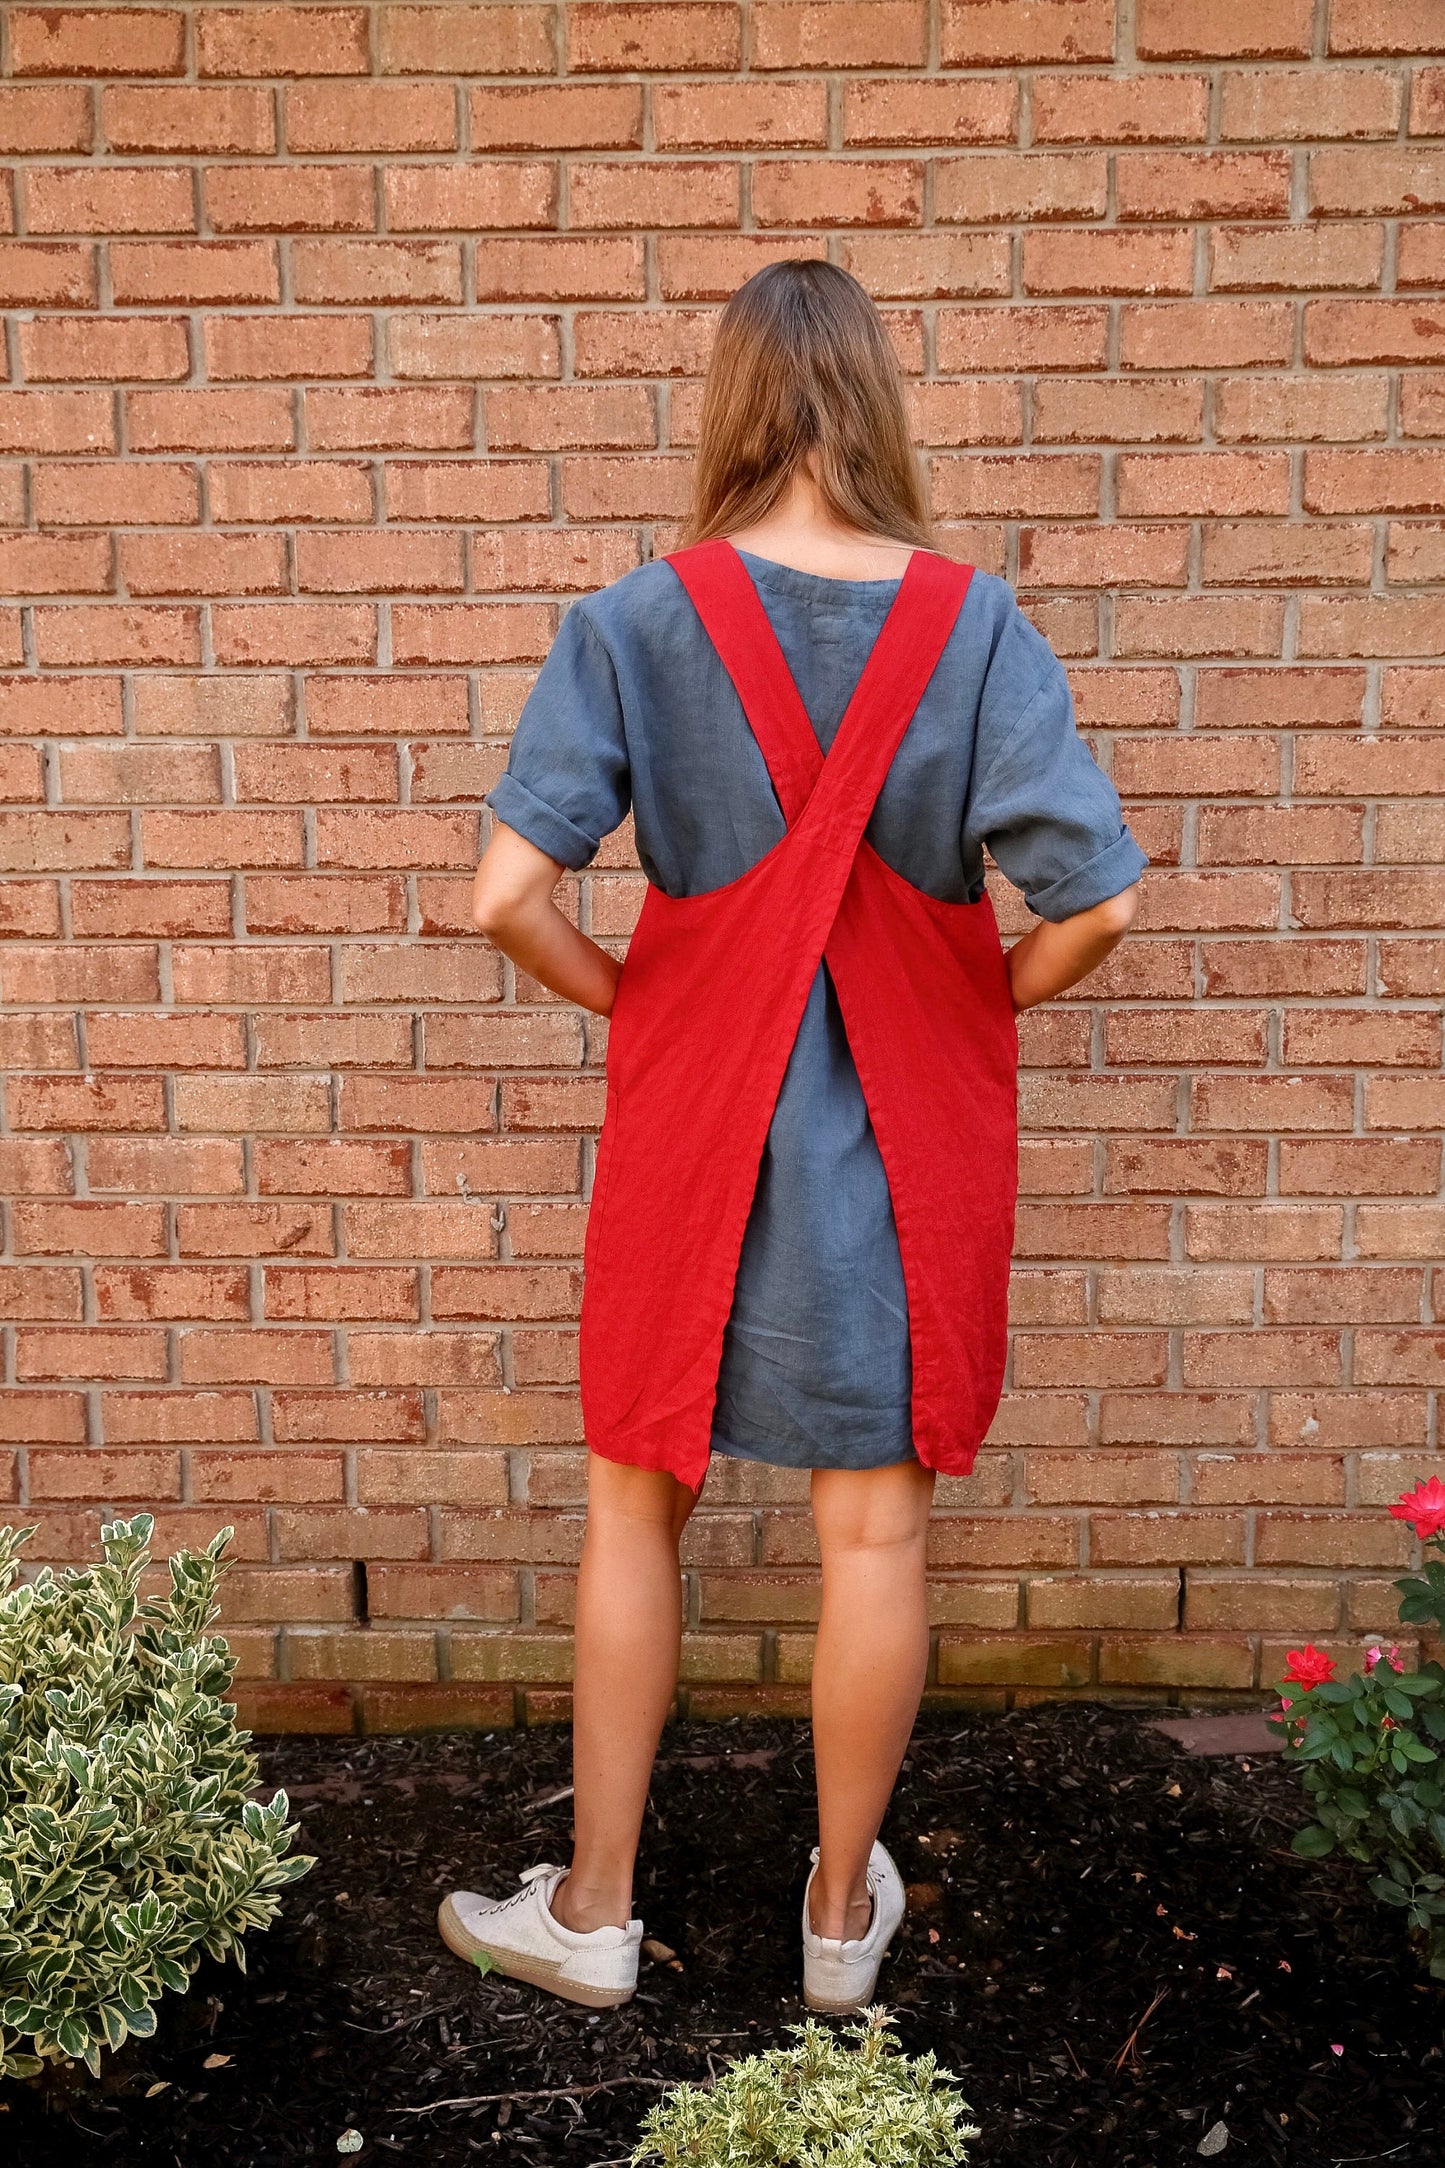 Person wearing a red linen apron, ready for festive kitchen activities